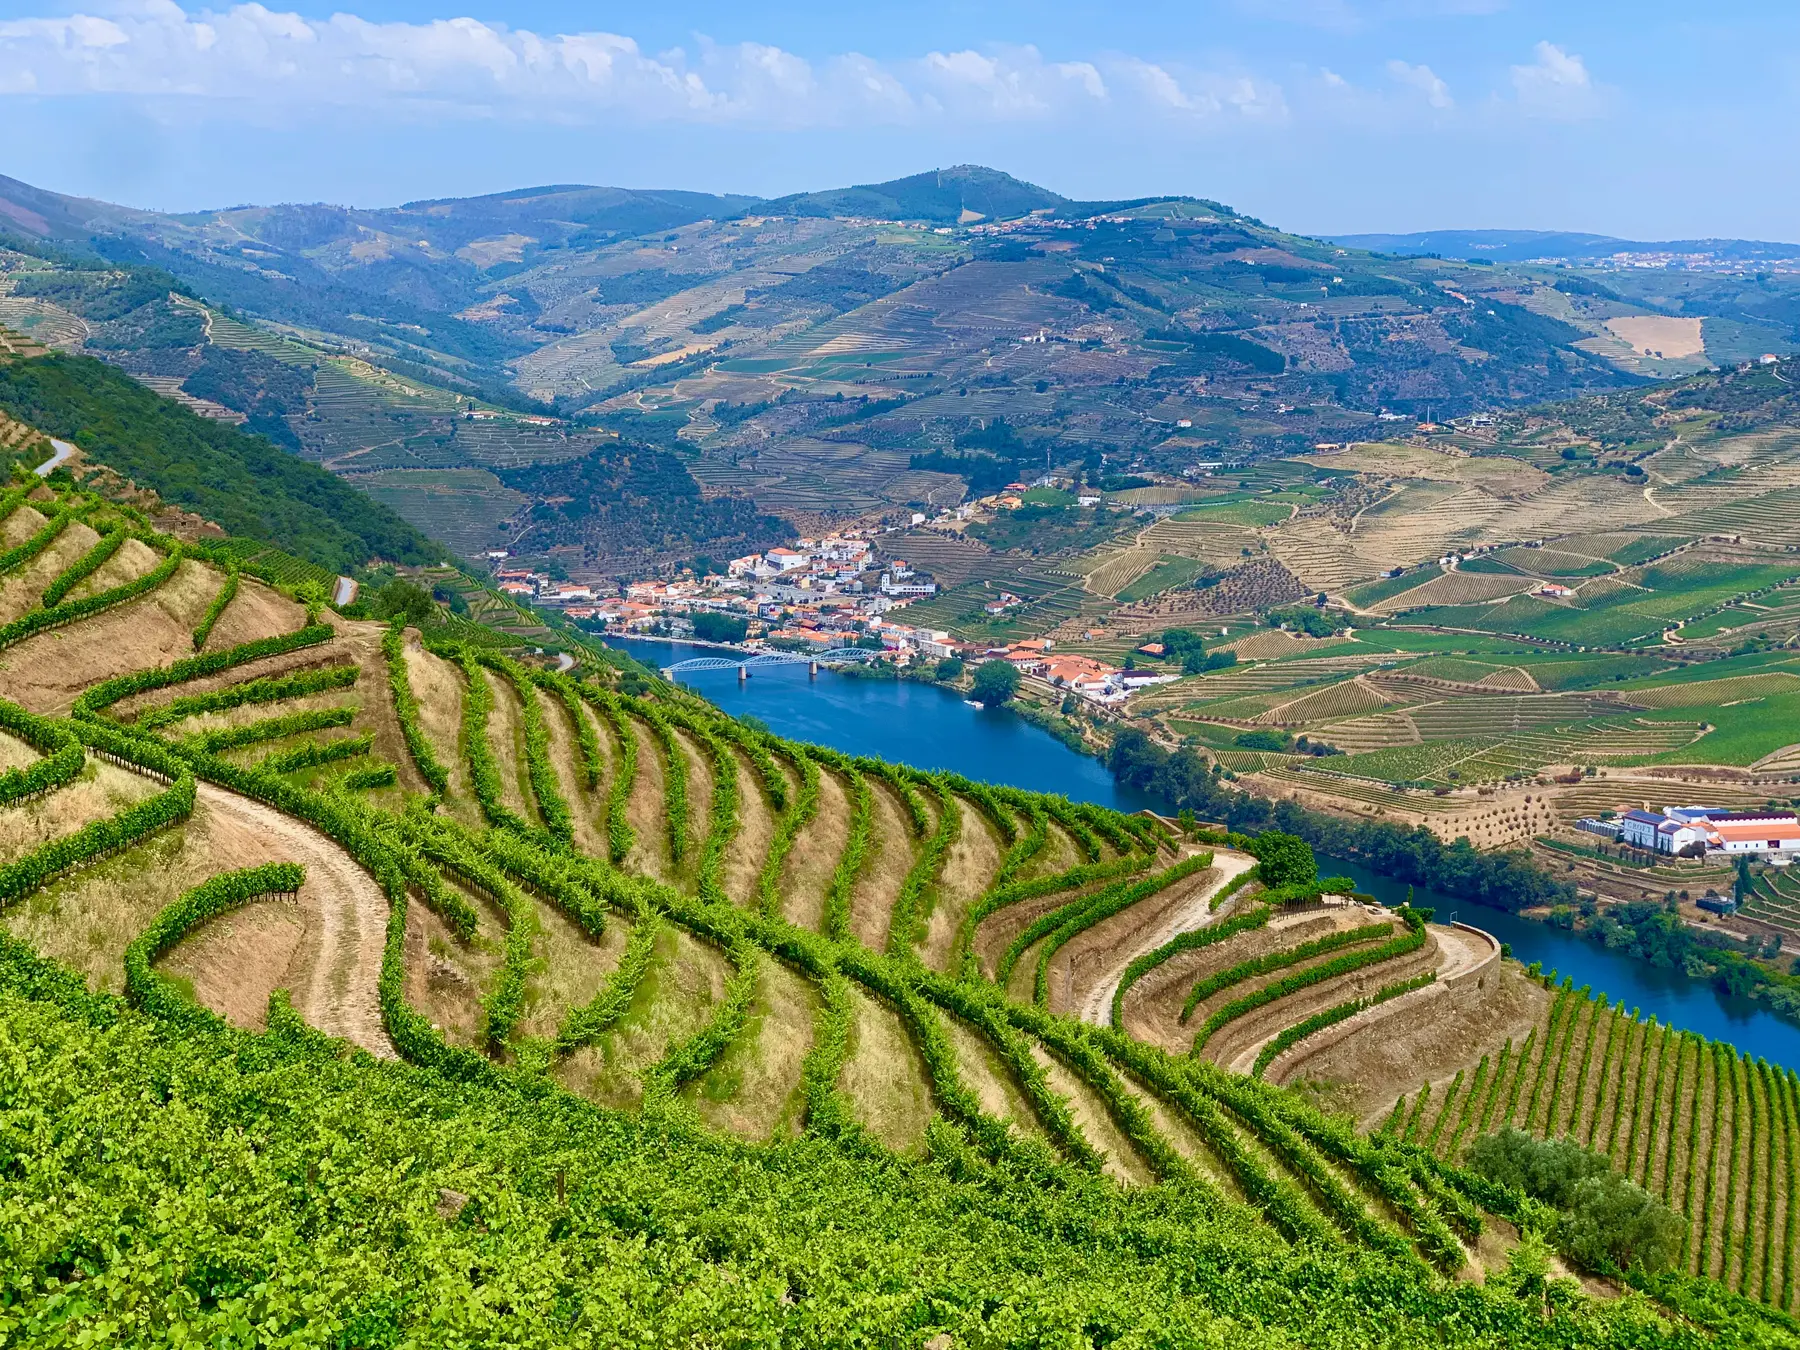 The scenic Douro River, photo by Roland Wood